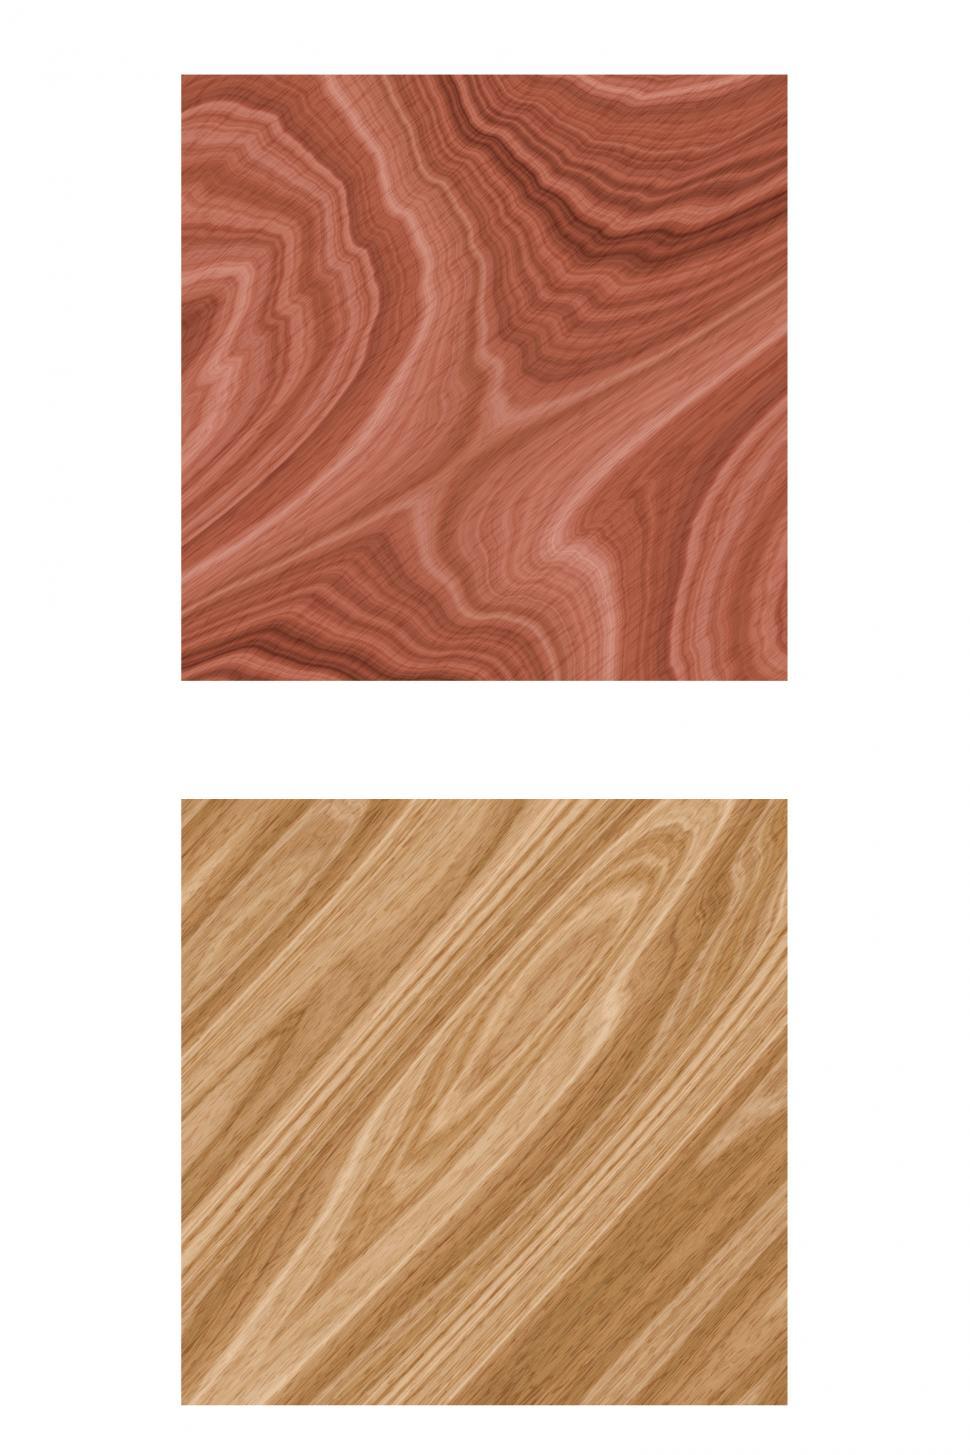 Free Image of Wood textures 